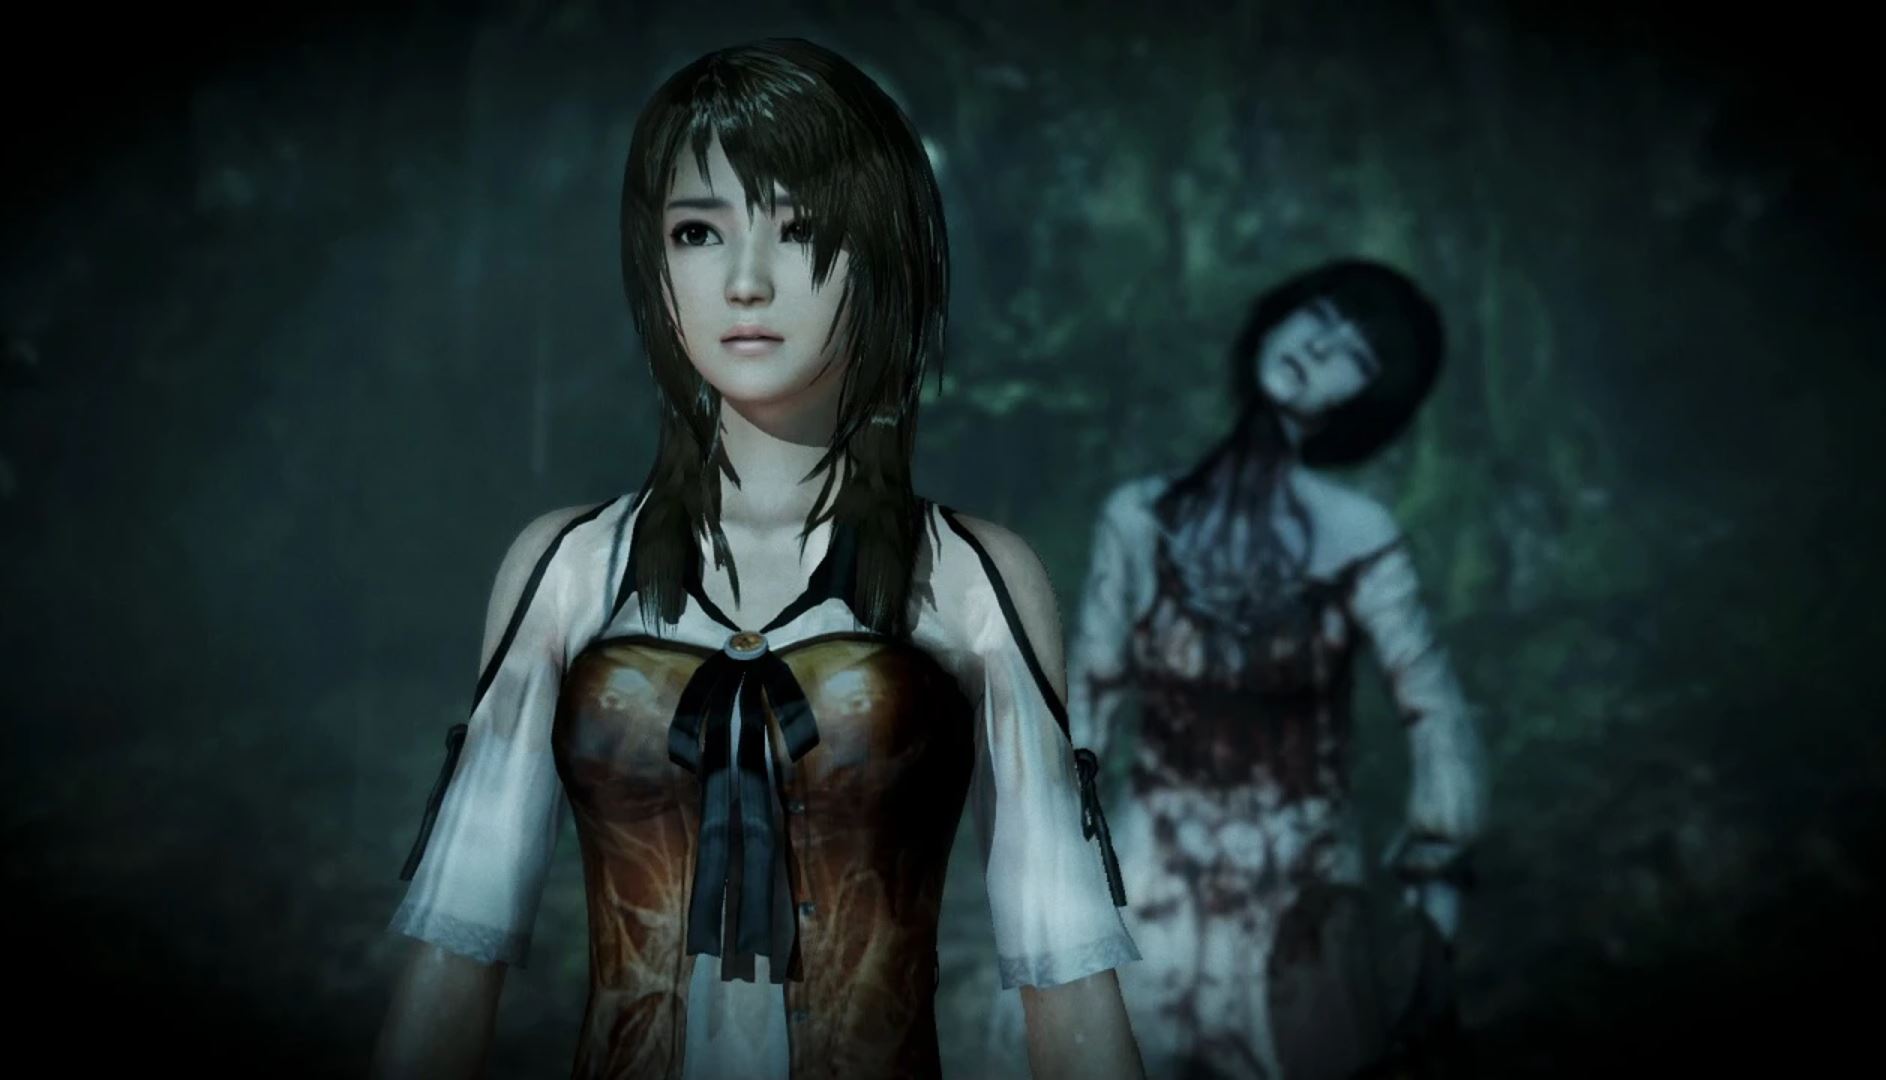  Fatal Frame director talks about all the ghosts he's seen: 'spirits have been a frightening presence in my life since I was young' 